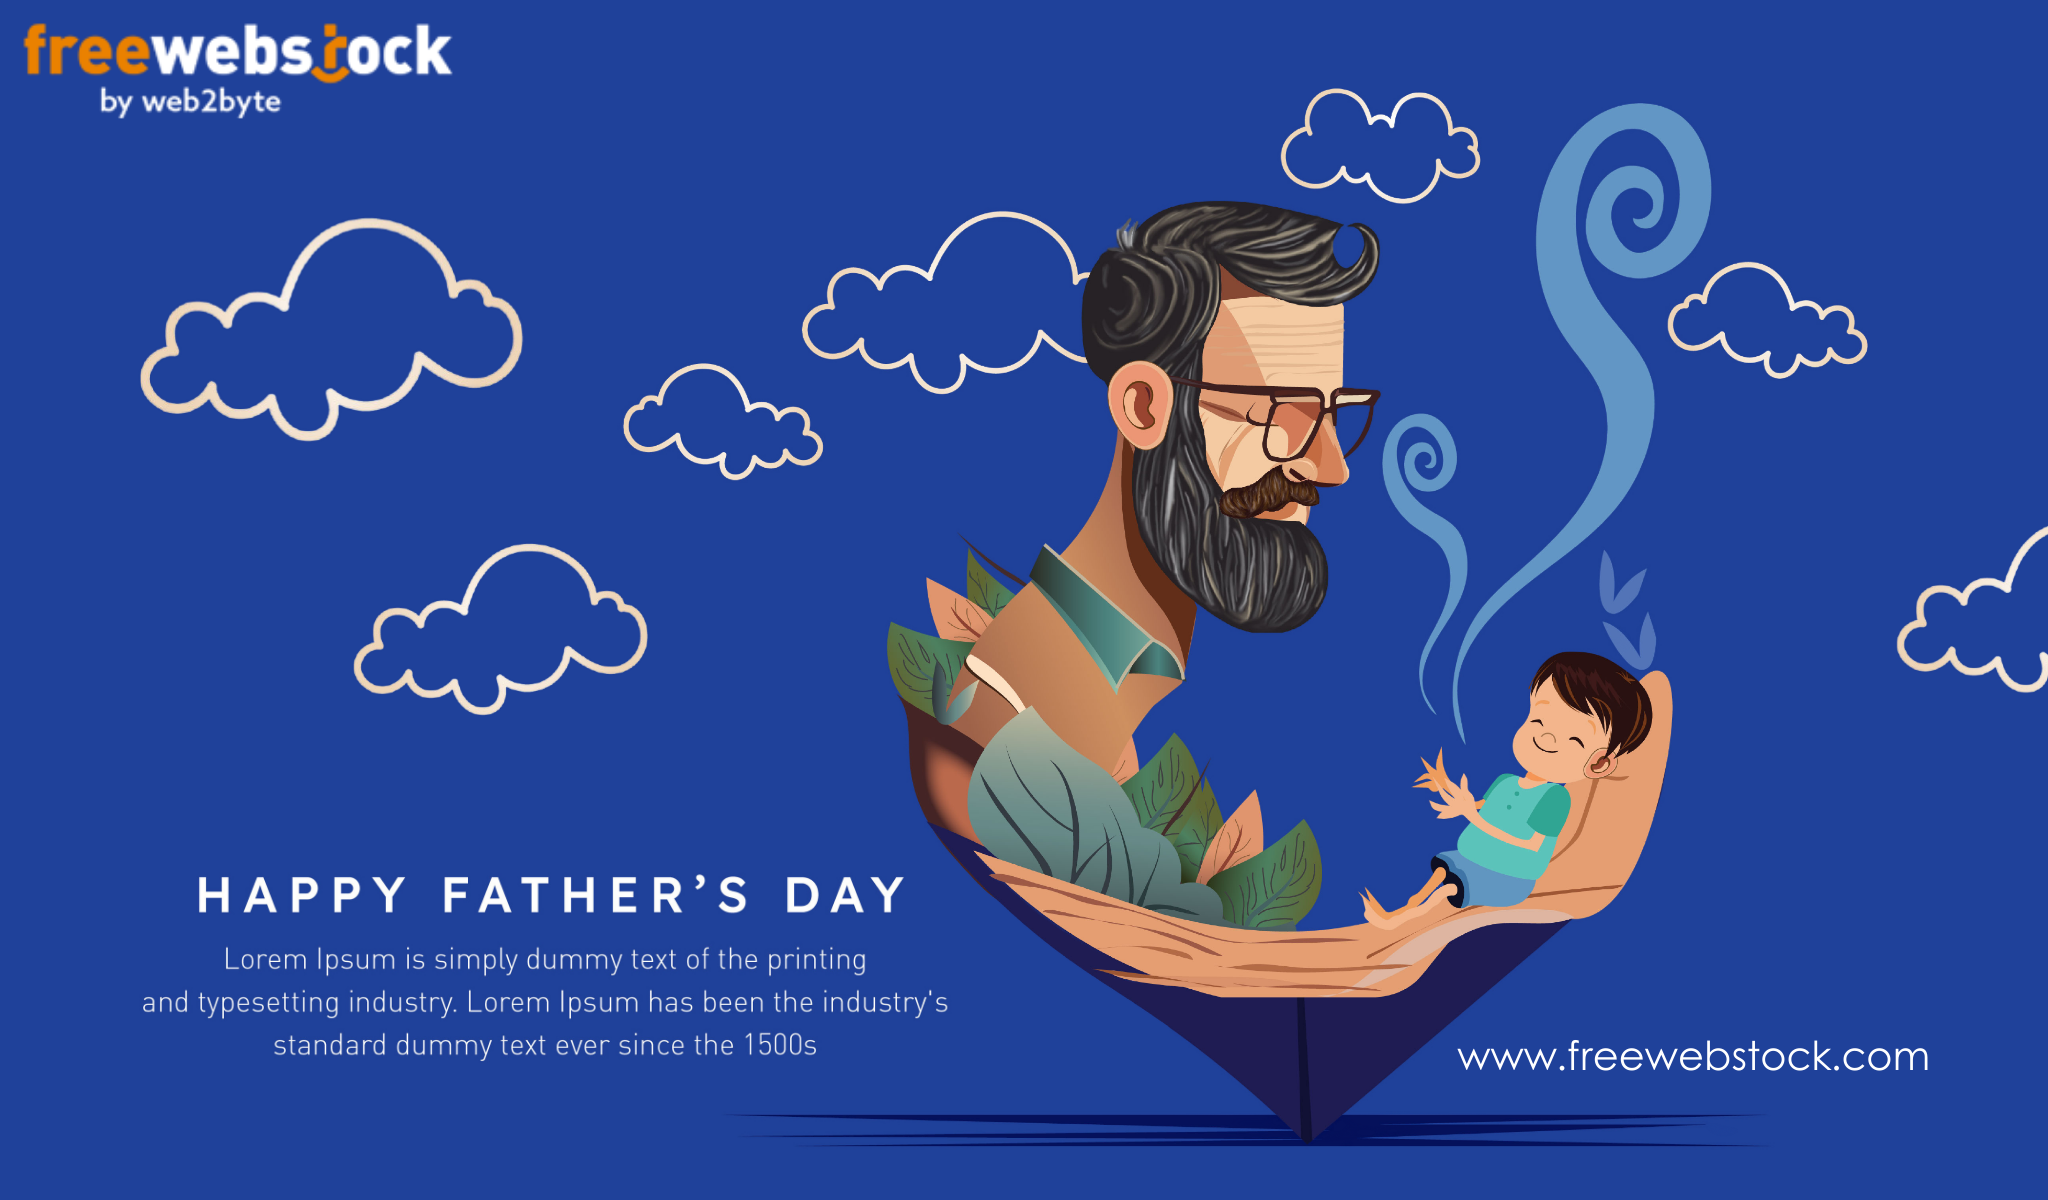 Get Ready for Father's Day with Our Collection of Free Images!